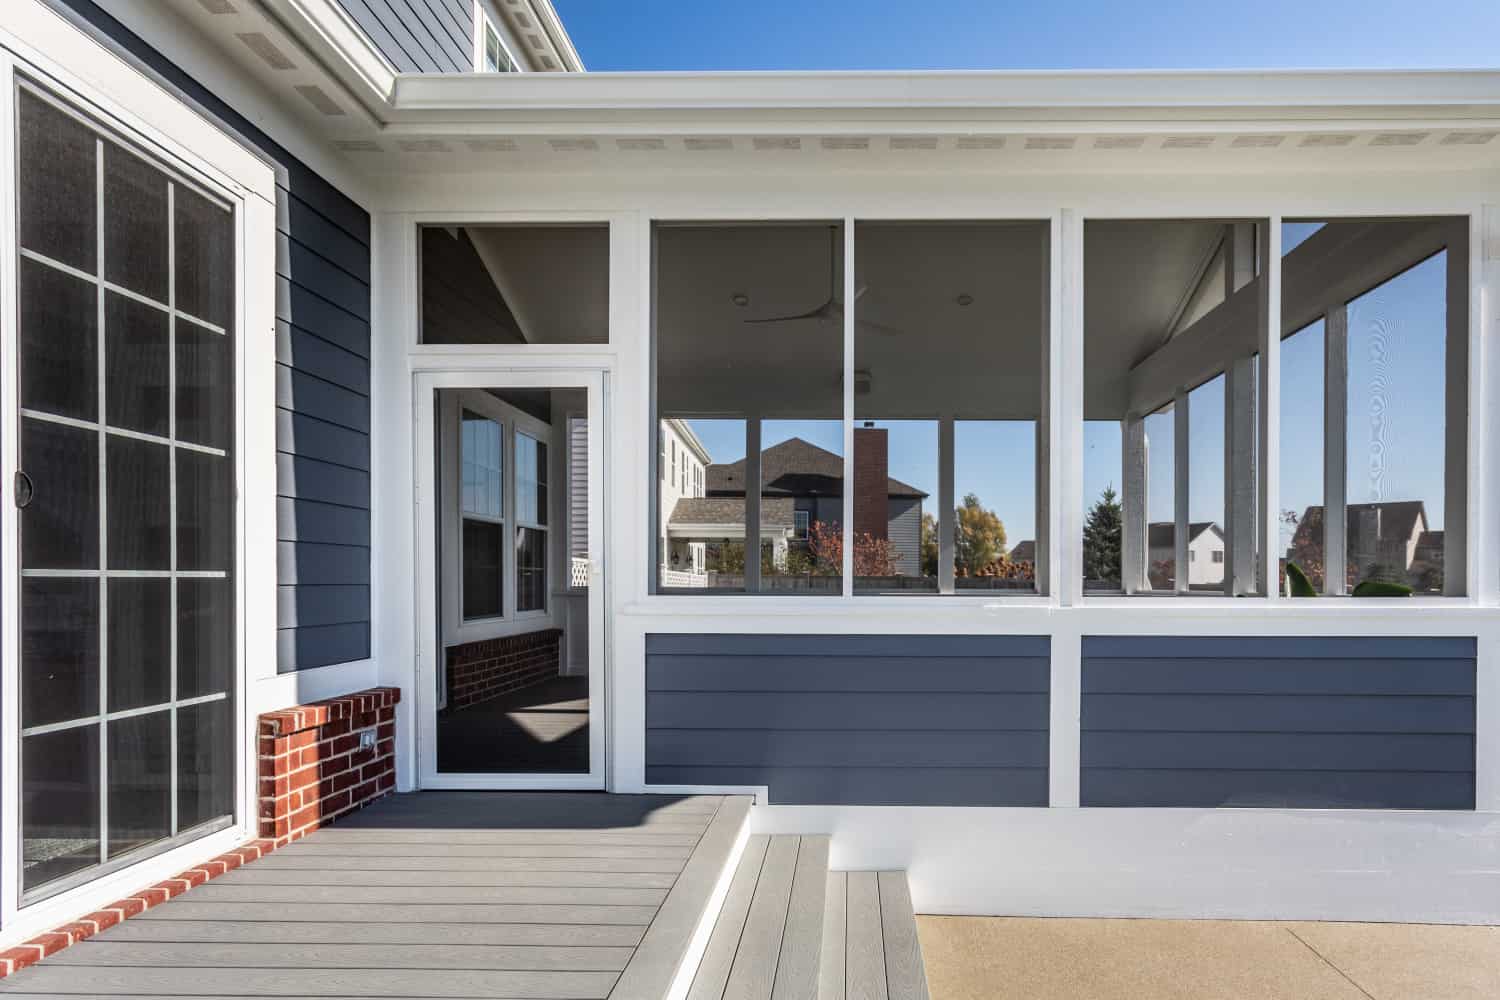 Nicholas Design Build | Remodel a screened-in porch with blue siding and white trim.